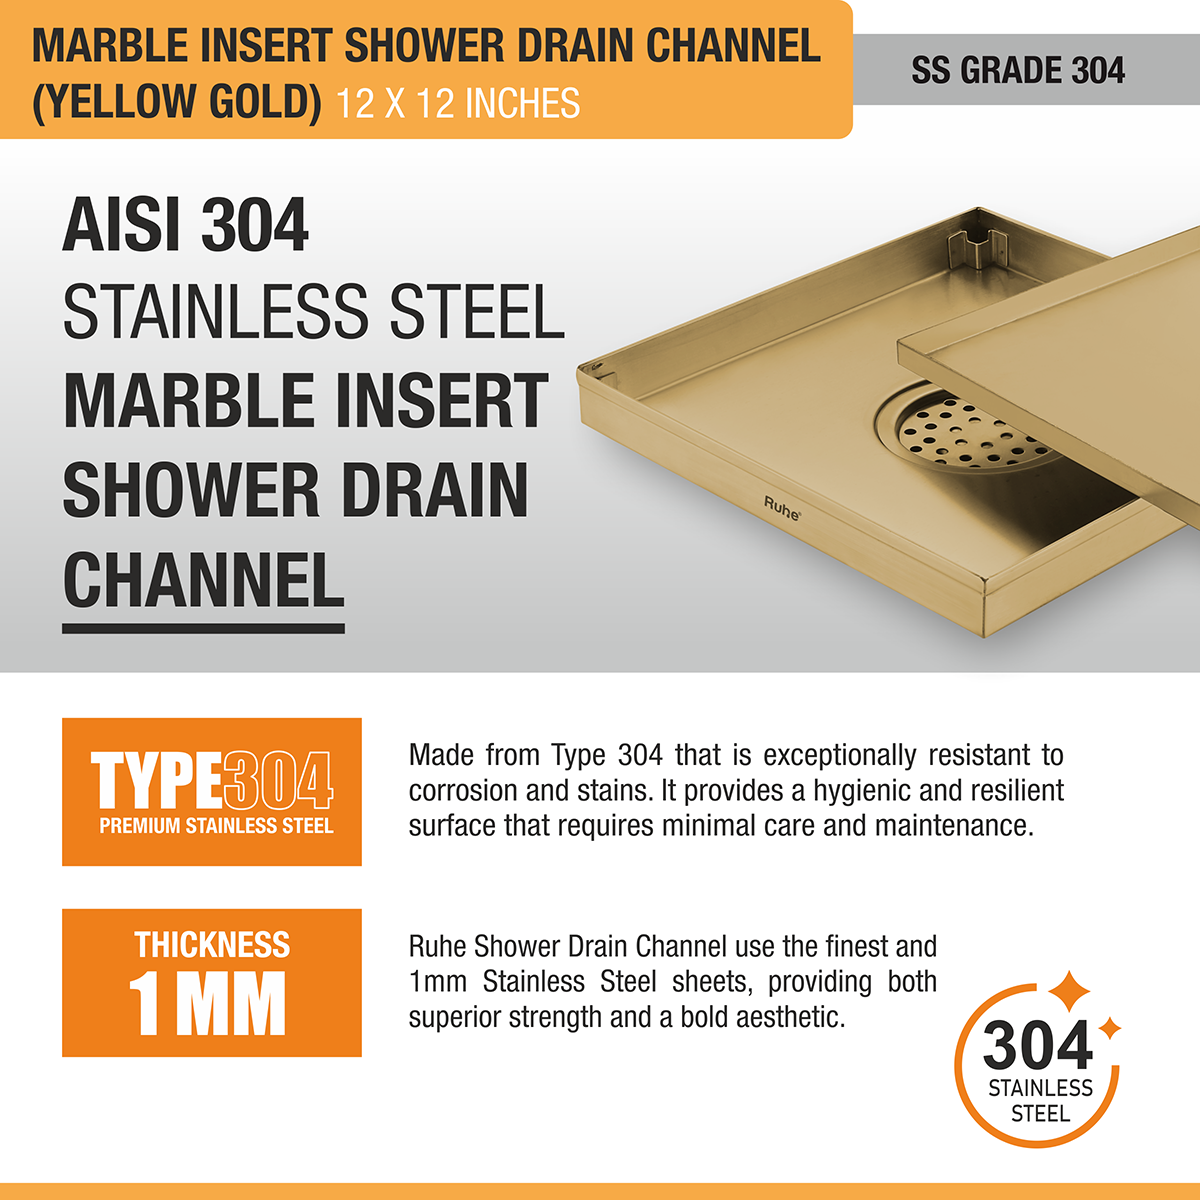 Marble Insert Shower Drain Channel (12 x 12 Inches) YELLOW GOLD PVD Coated stainless steel